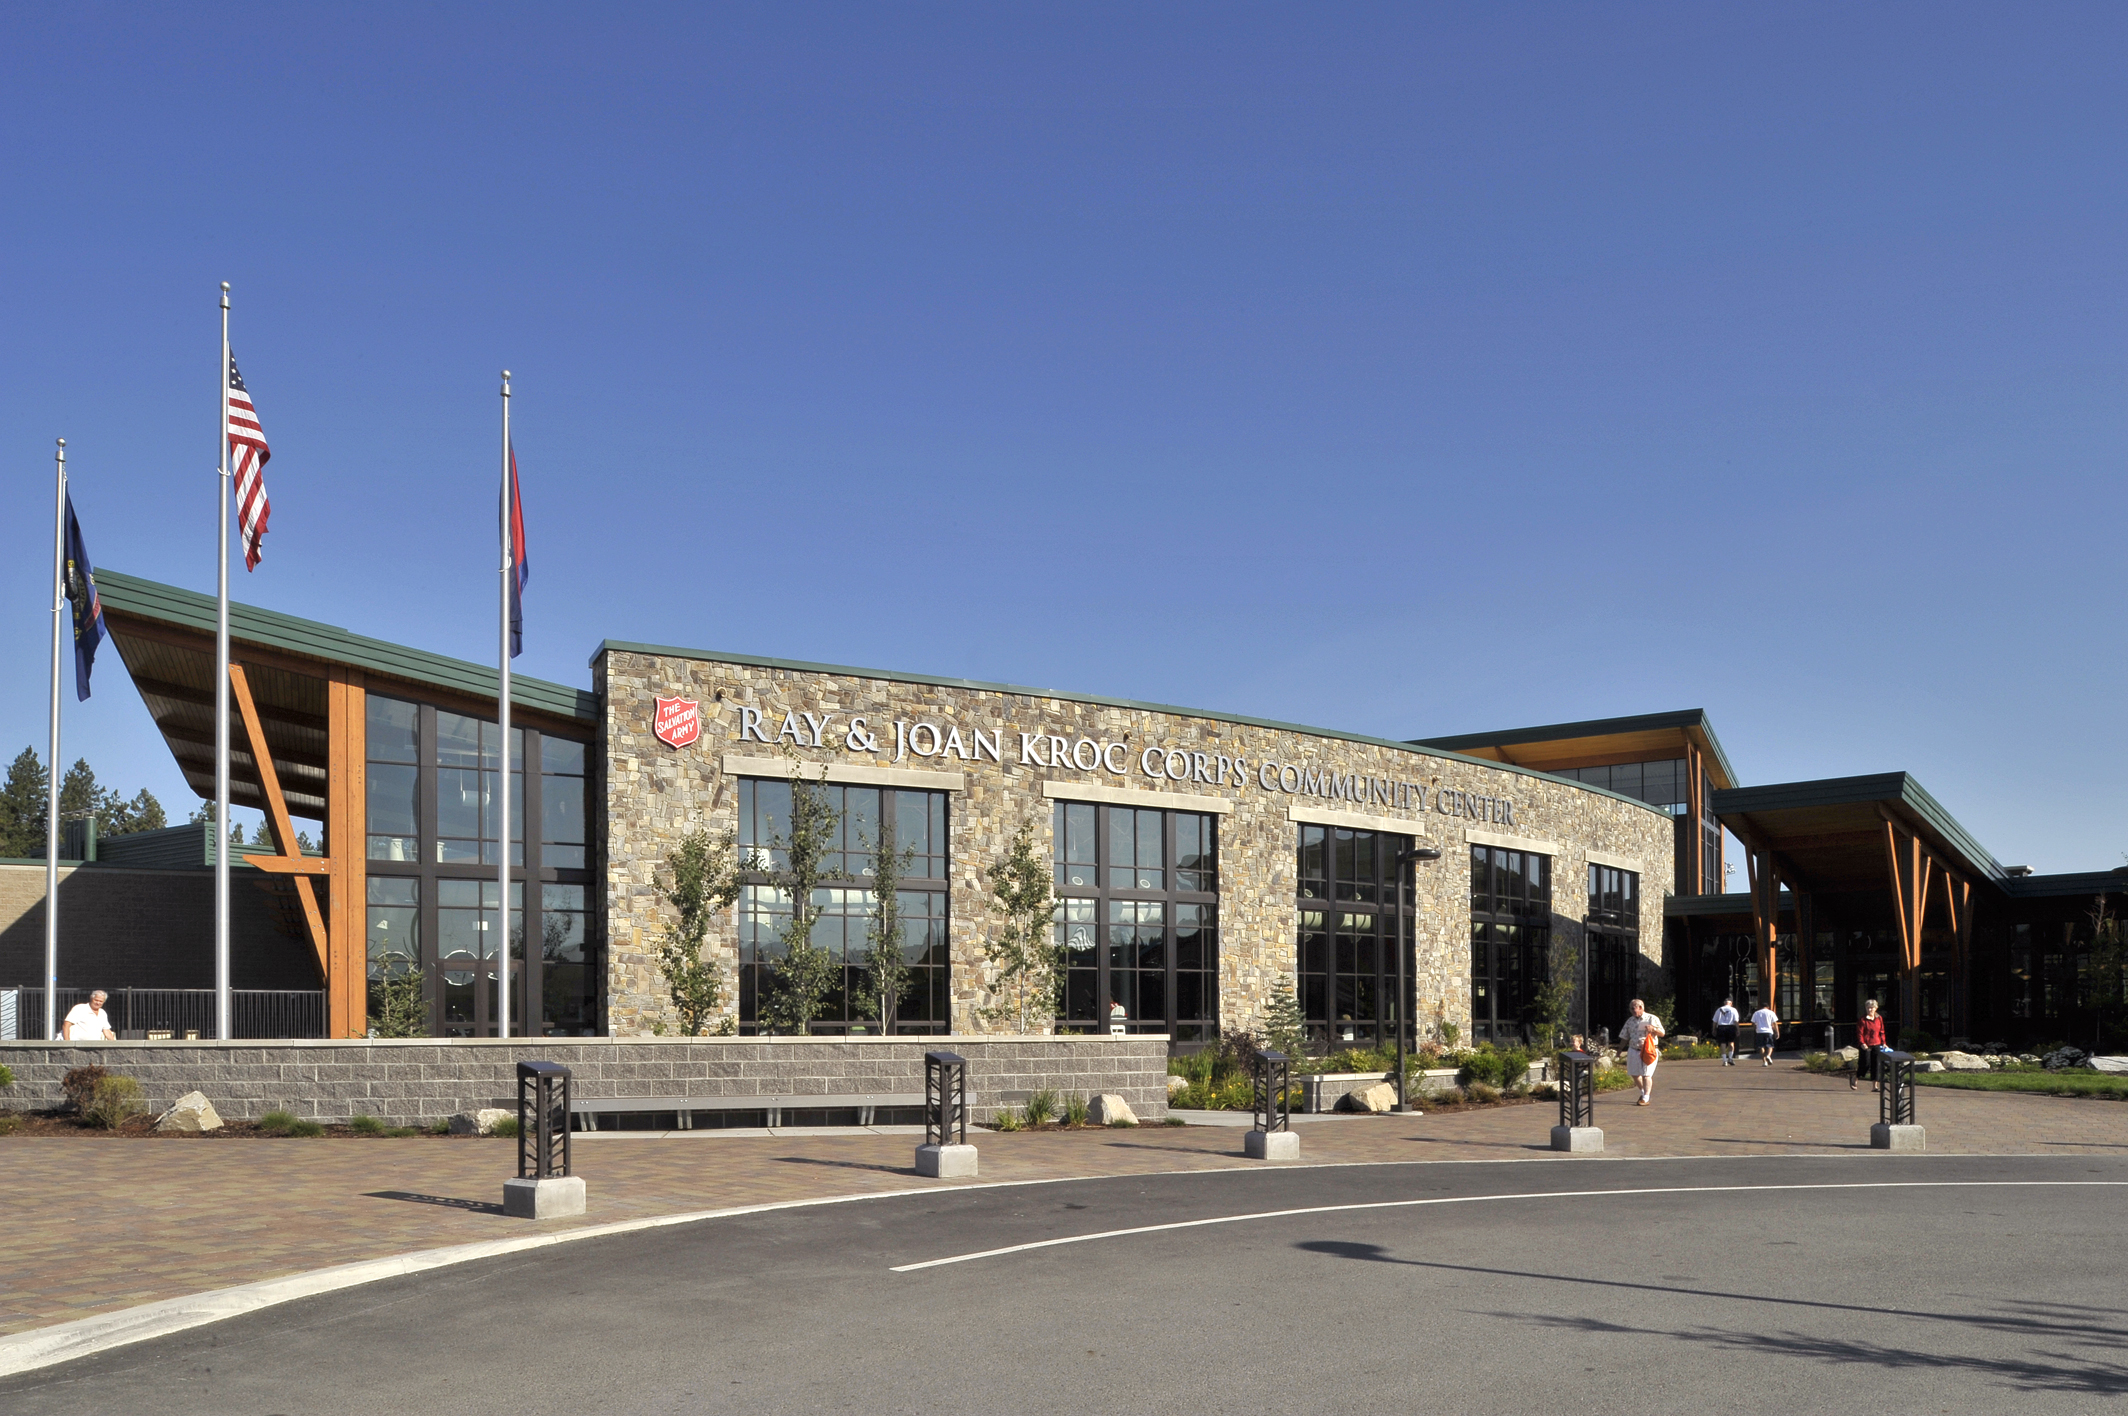 The Kroc Center is a community center located in Coeur d'Alene Idaho. The design includes state of the art aquatic pools, a gymnasium, community rooms, an aerobics studio, and a world class theater.